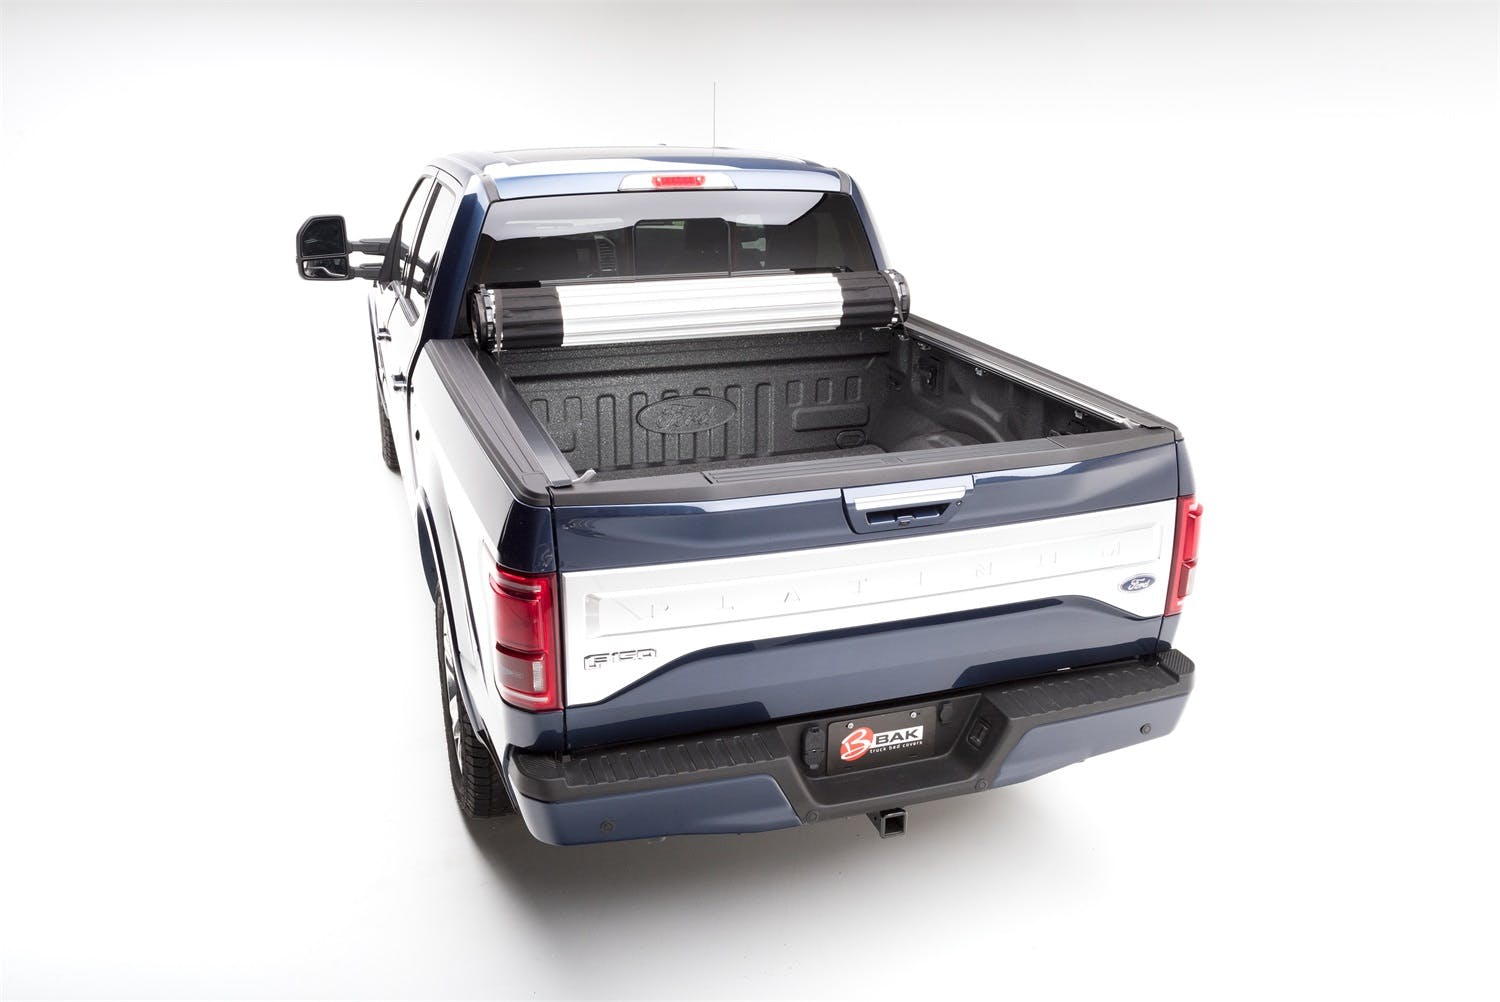 BAK Industries 39328 Revolver X2 Hard Rolling Truck Bed Cover